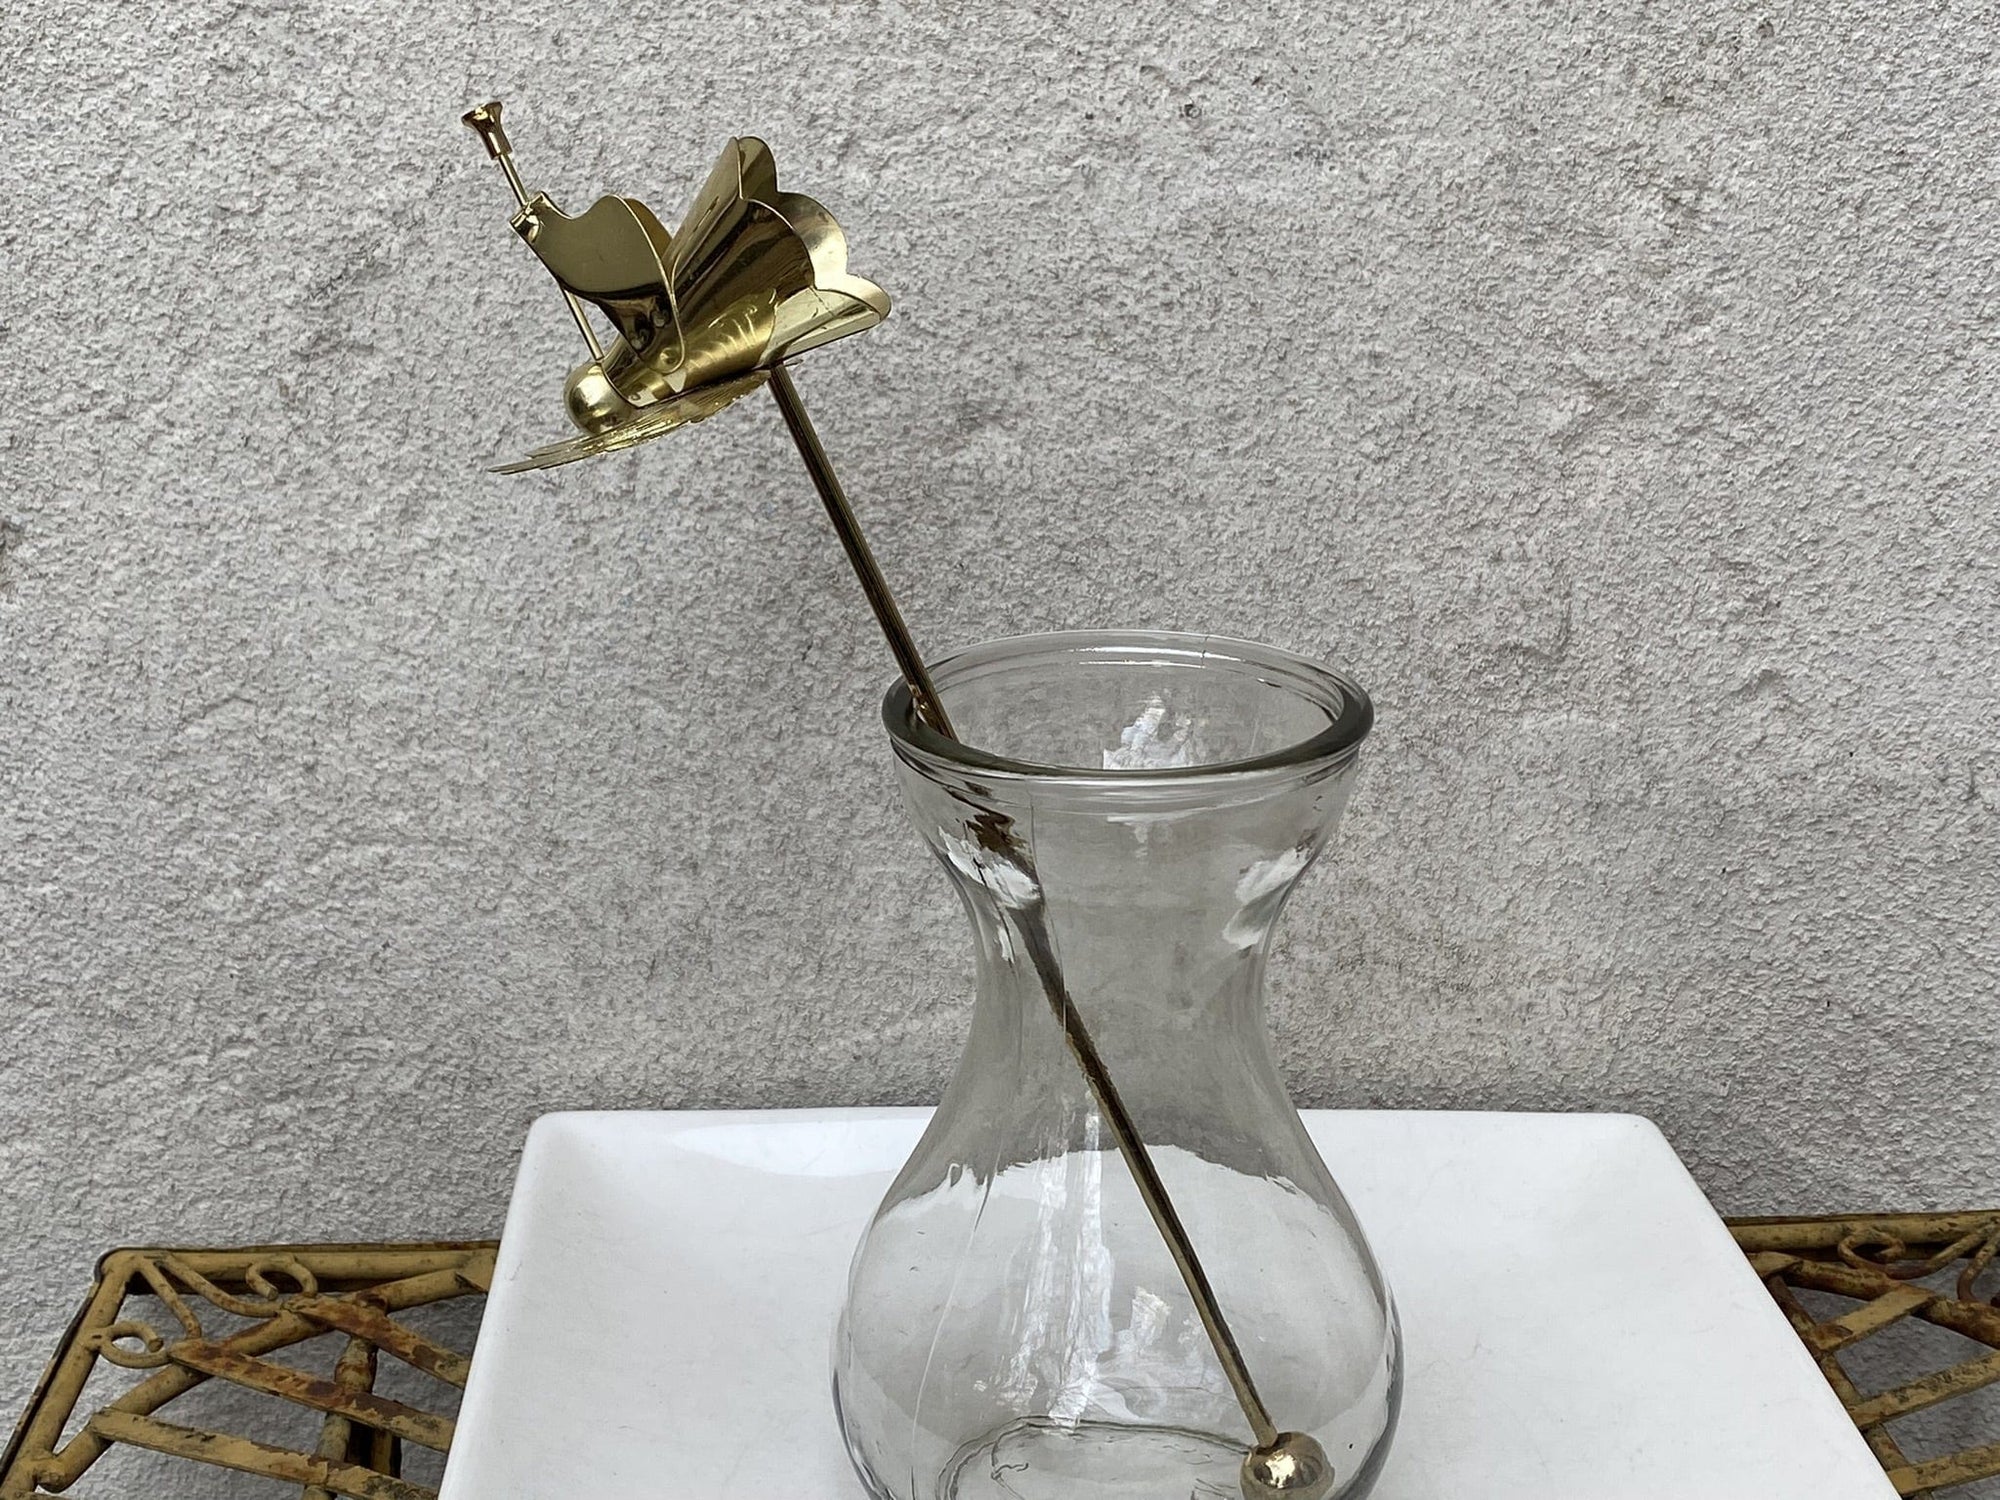 I Like Mike's Mid Century Modern Candle Snuffers Brass Candle Snuffer with Angle Cap and 8.5" Reach